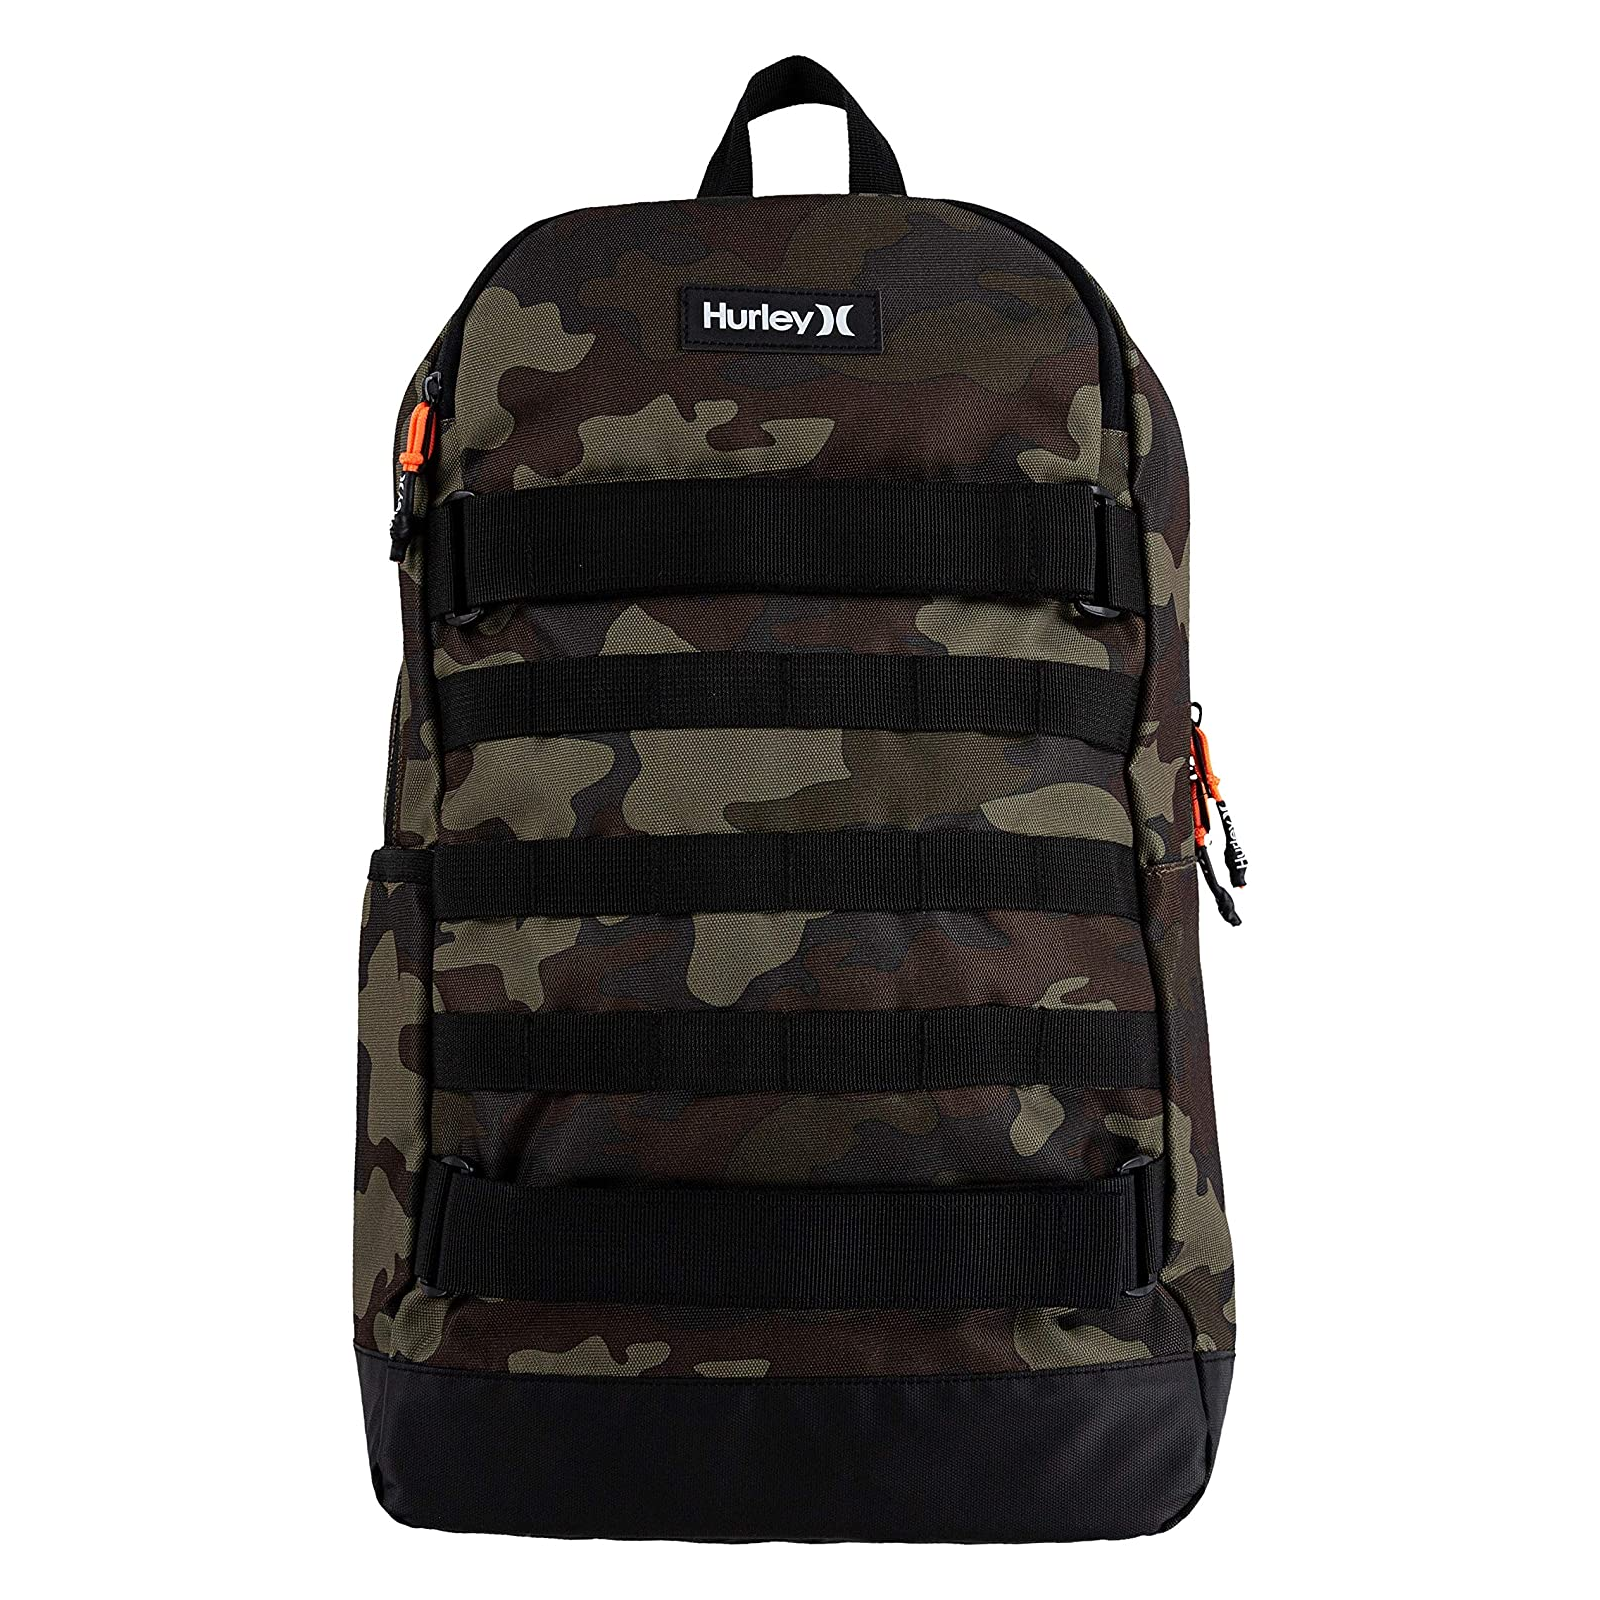 Only packs. Рюкзак Hurley no comply Backpack. Hurley рюкзак хаки. Рюкзак Hurley Golden Doodle. Рюкзак Hurley x зелёный папоротник.